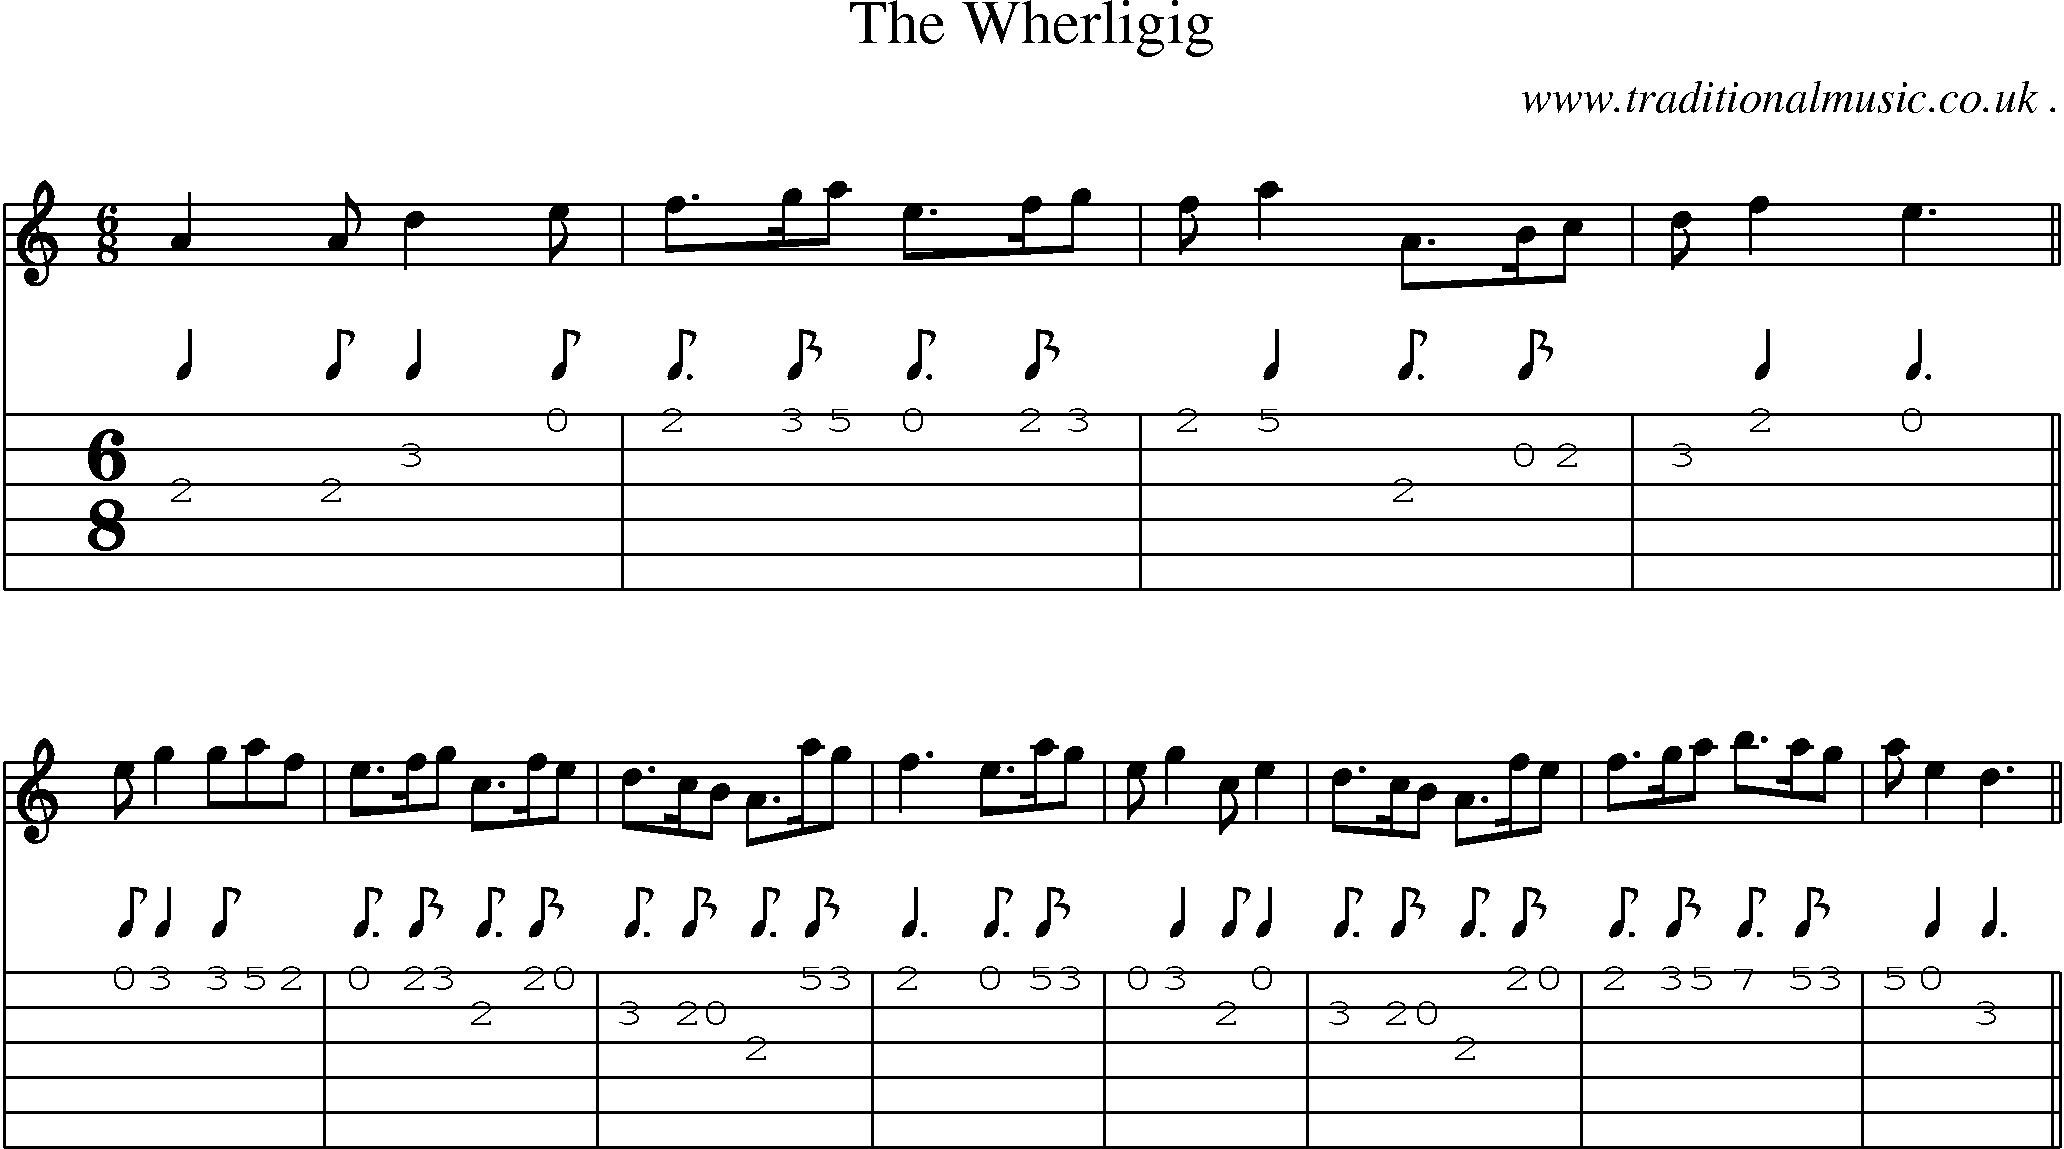 Sheet-Music and Guitar Tabs for The Wherligig